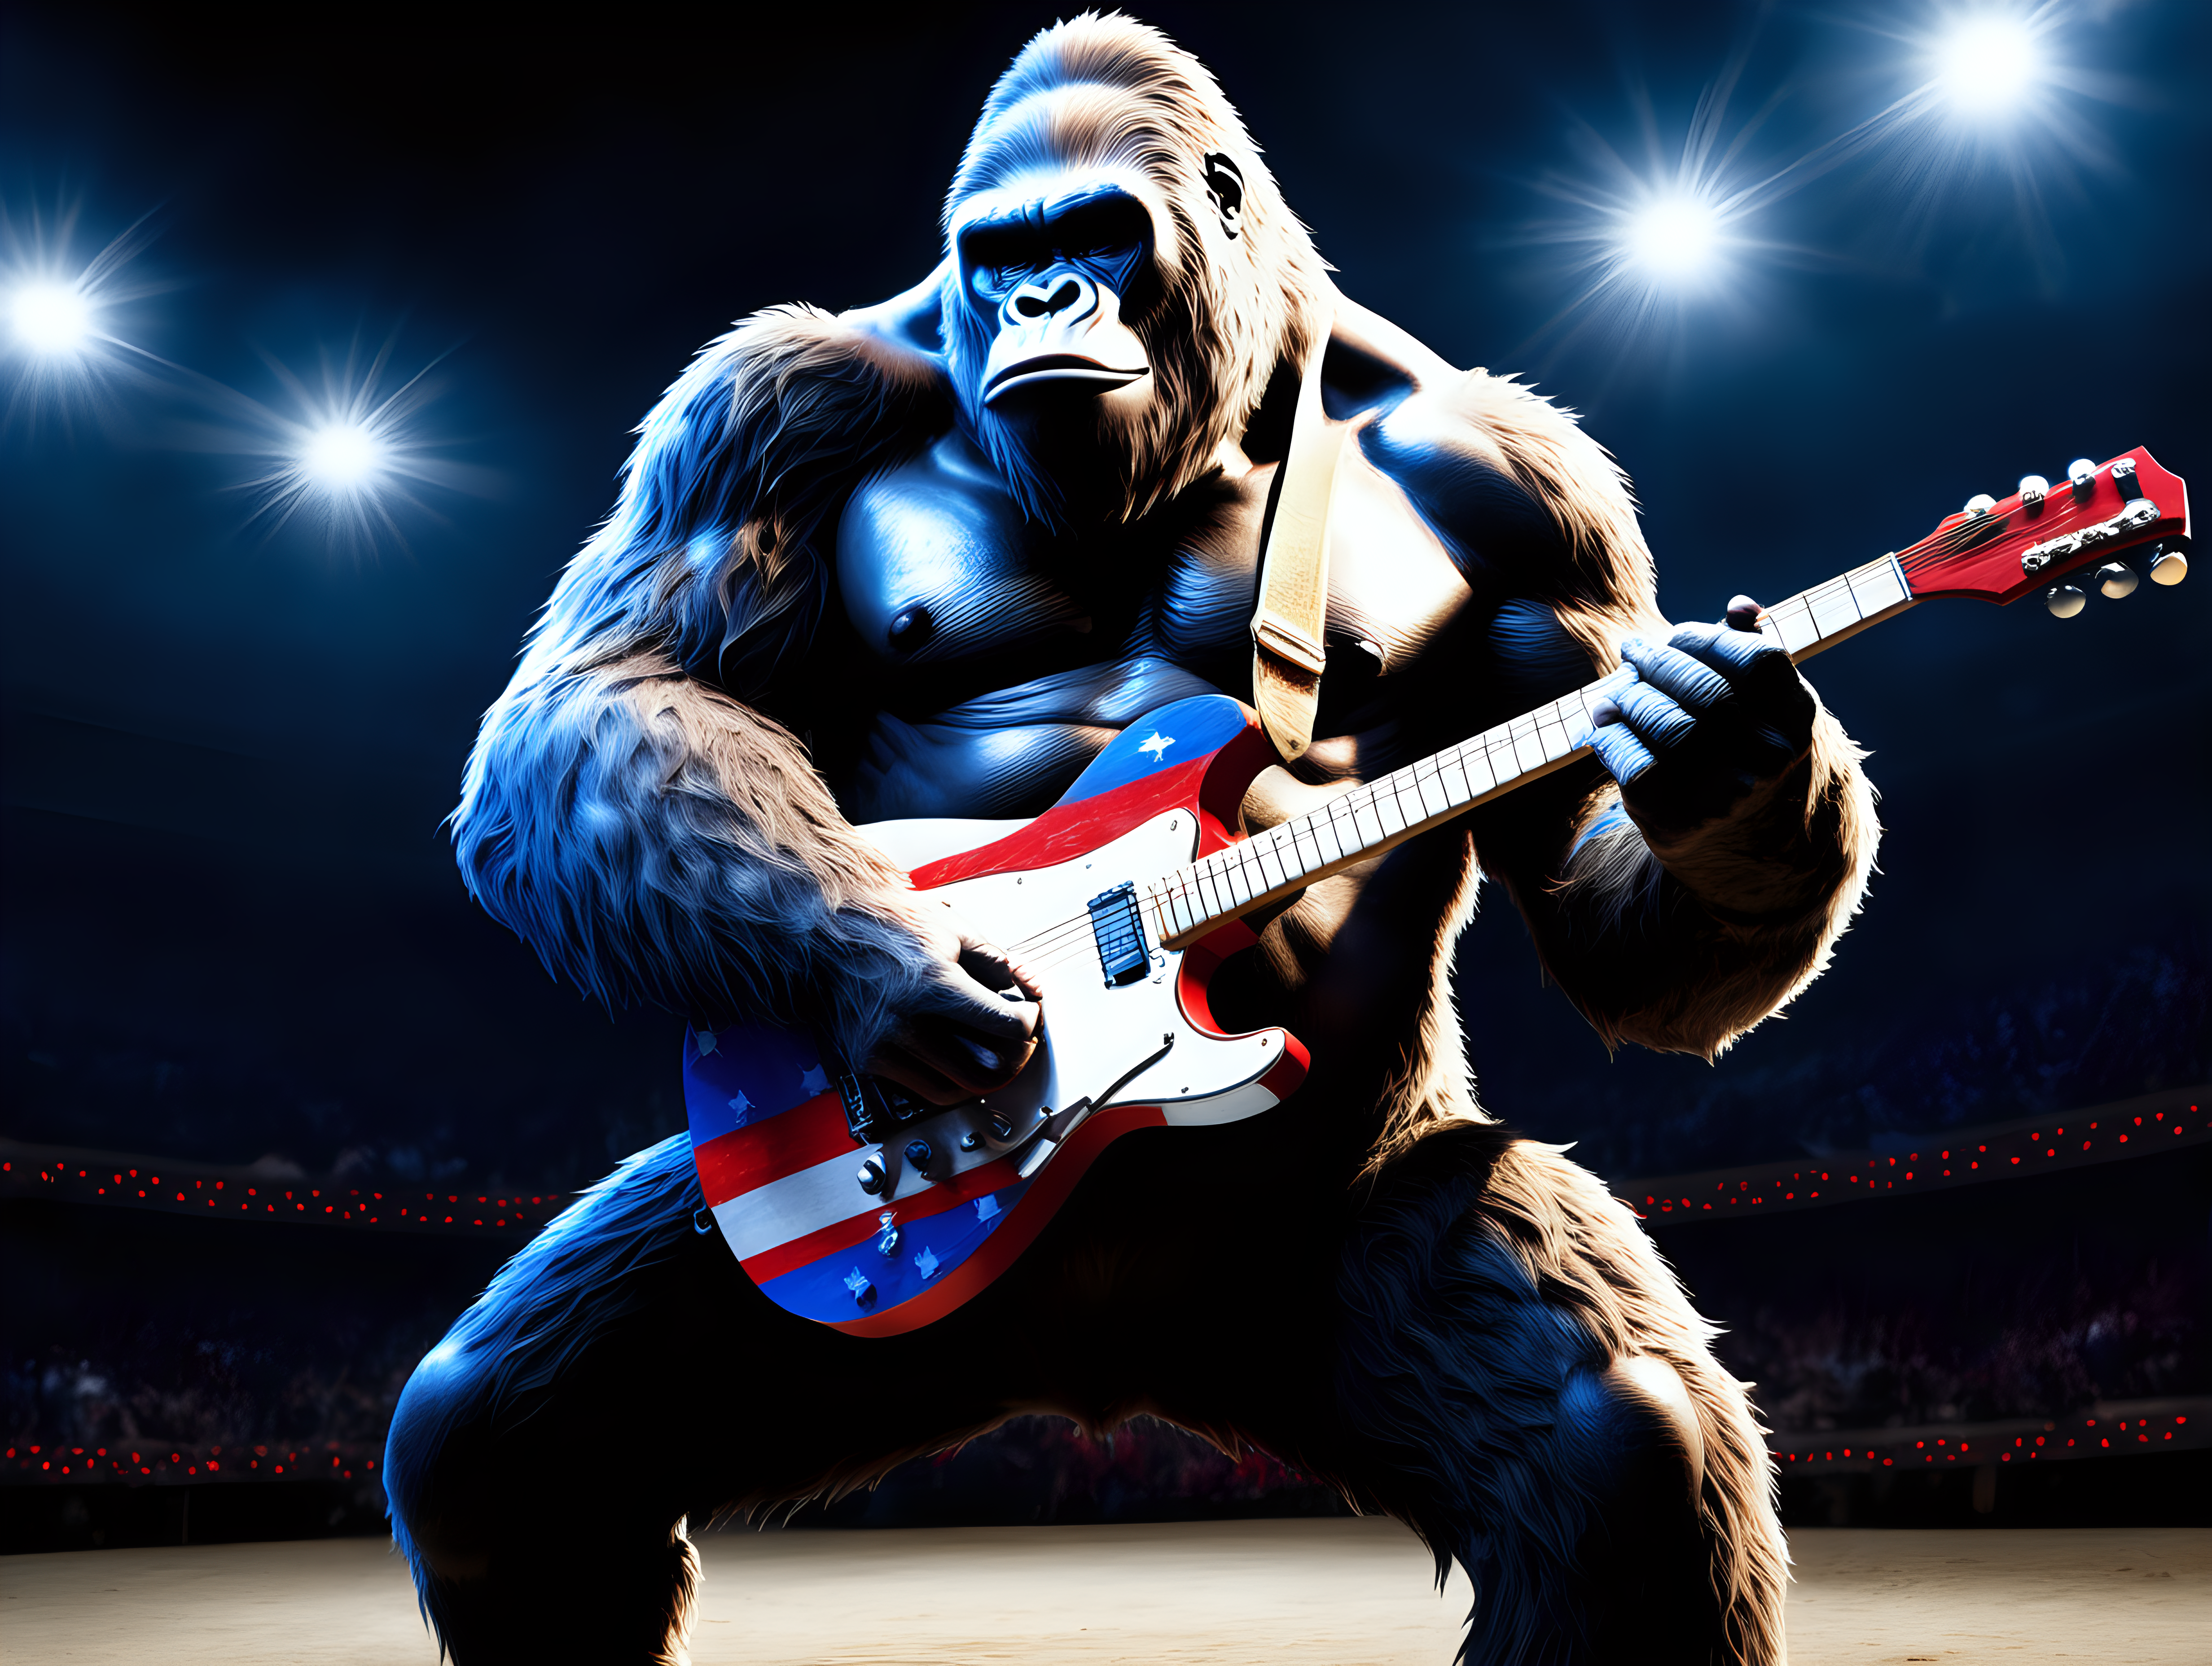 King Kong playing a red white and blue guitar in an arena at night